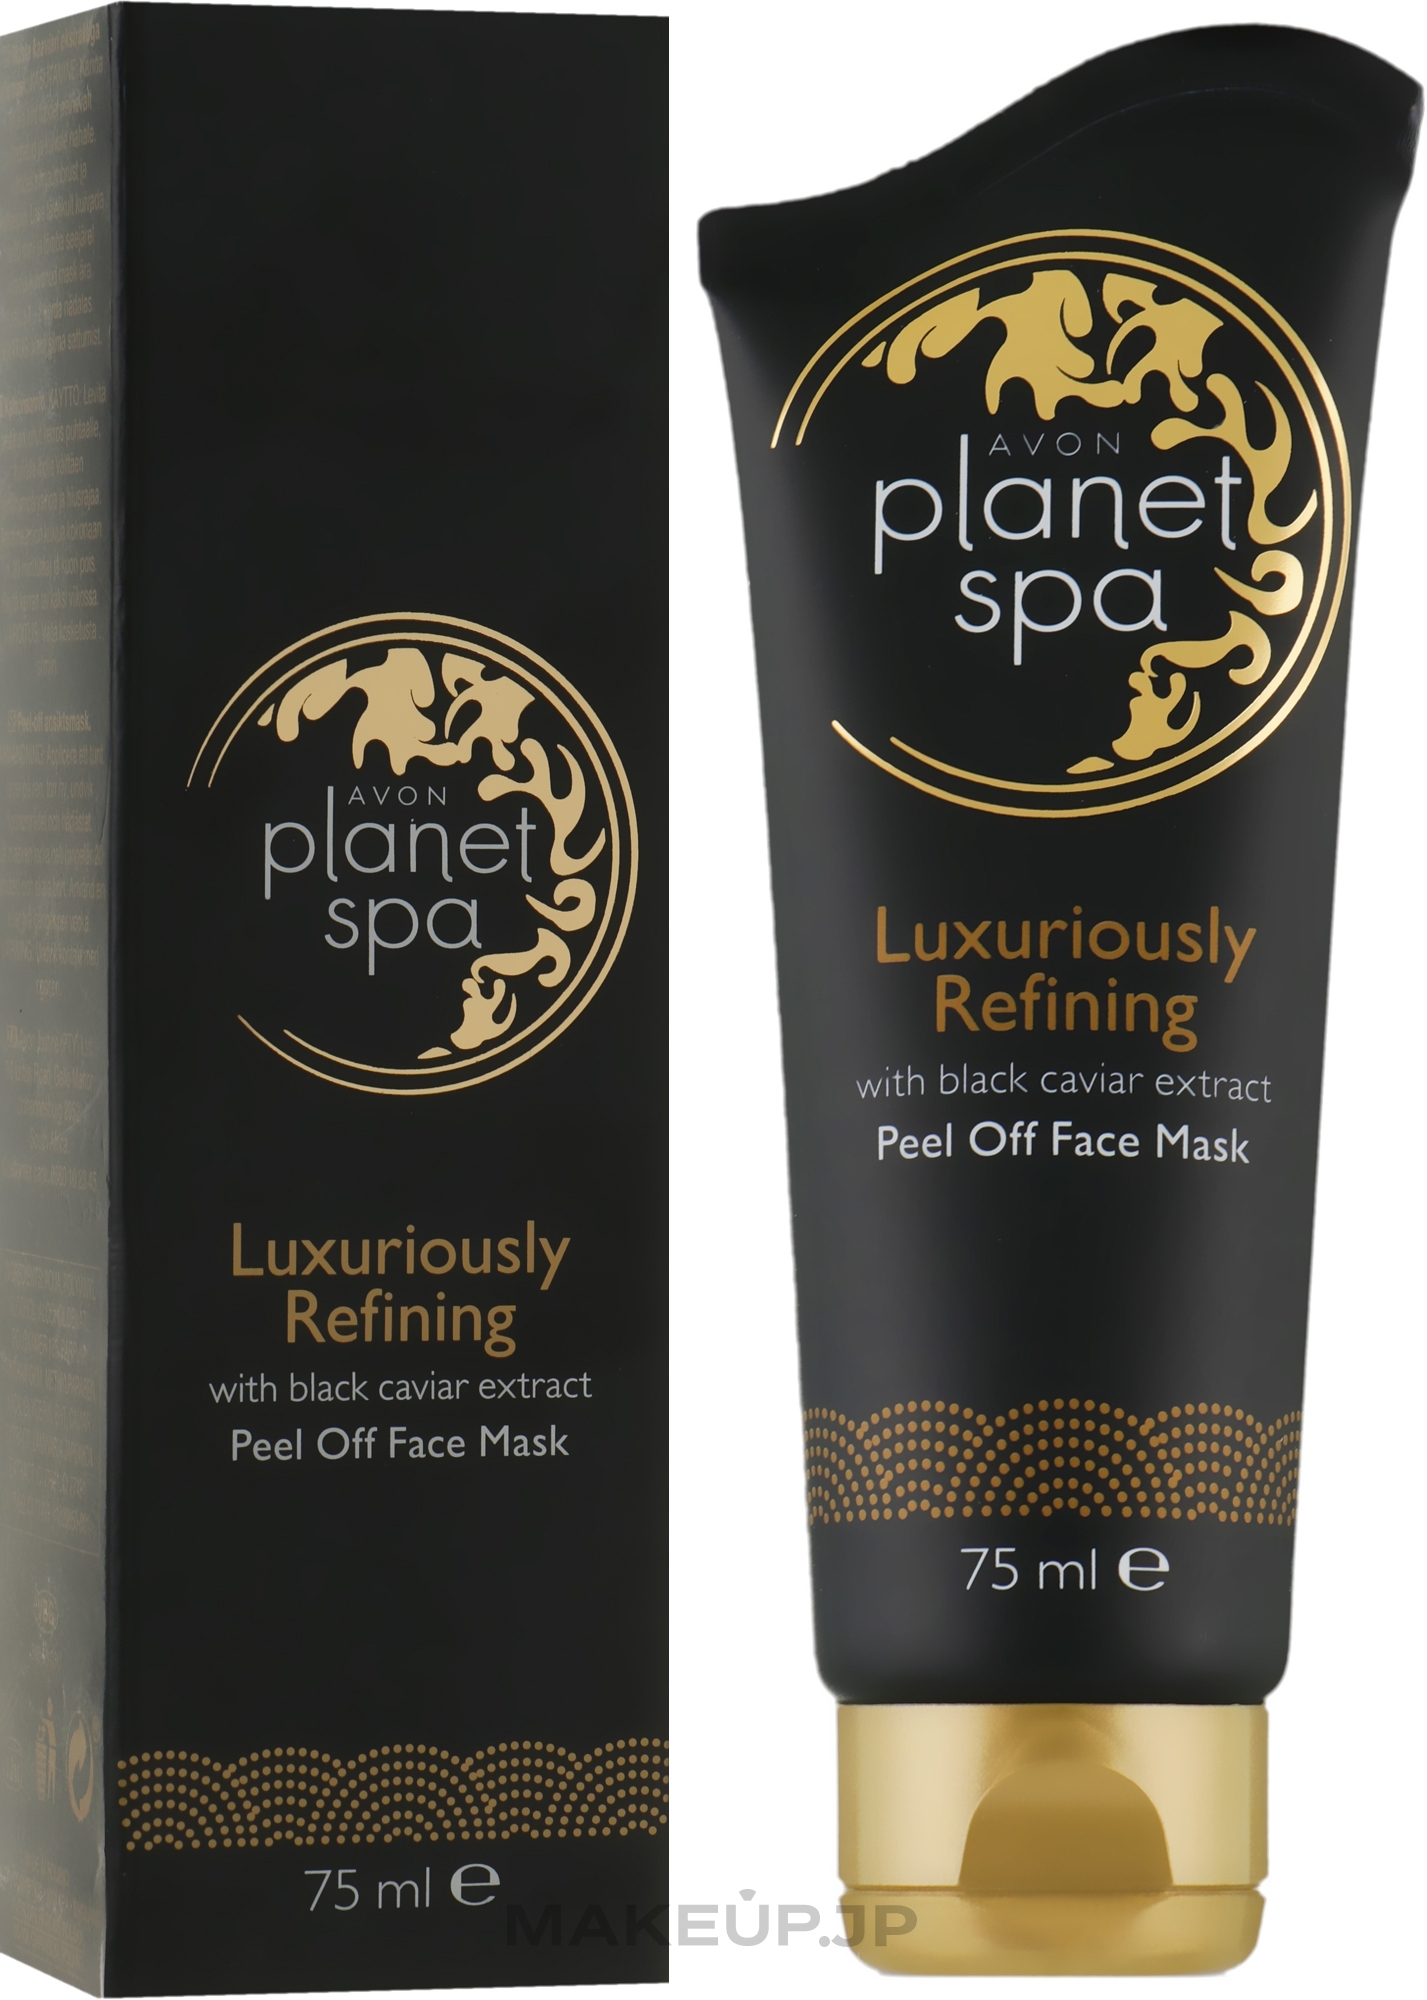 Peel-Off Face Mask with Black Caviar Extract "Luxurious Renewal" - Avon Planet SPA Facial Mask — photo 75 ml